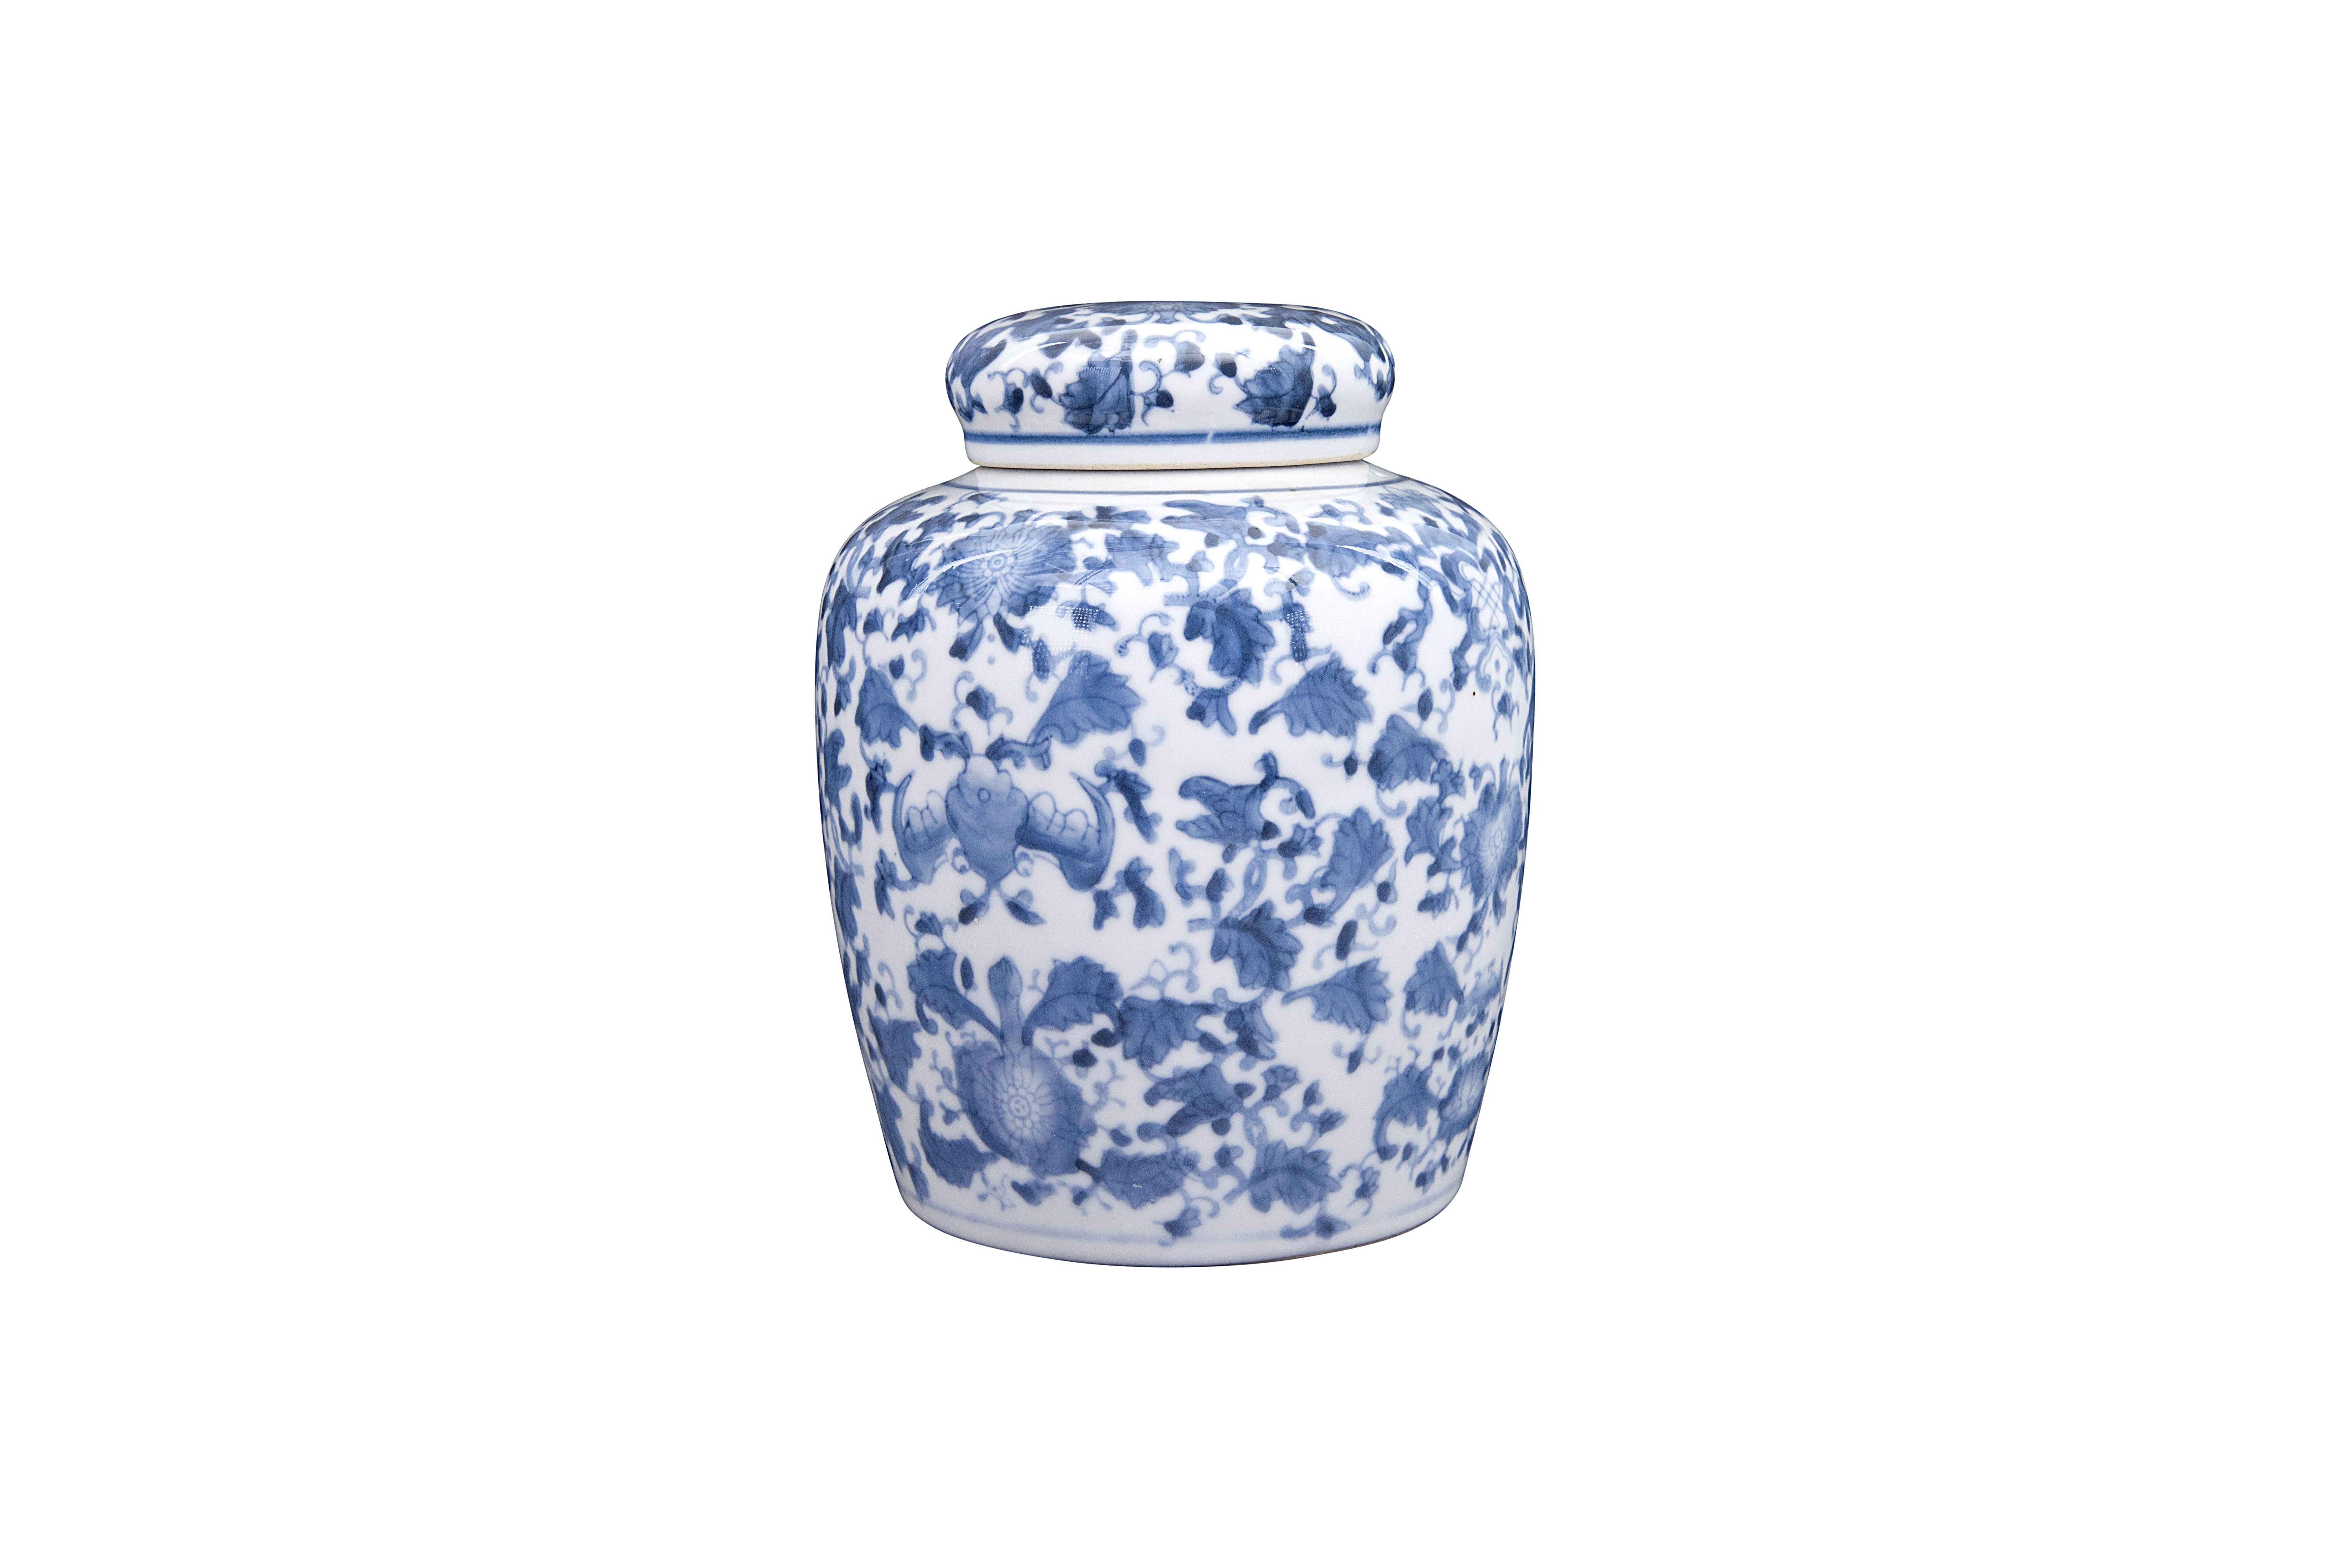 Decorative Blue and White Ceramic Ginger Jar with Lid - Nomad Home